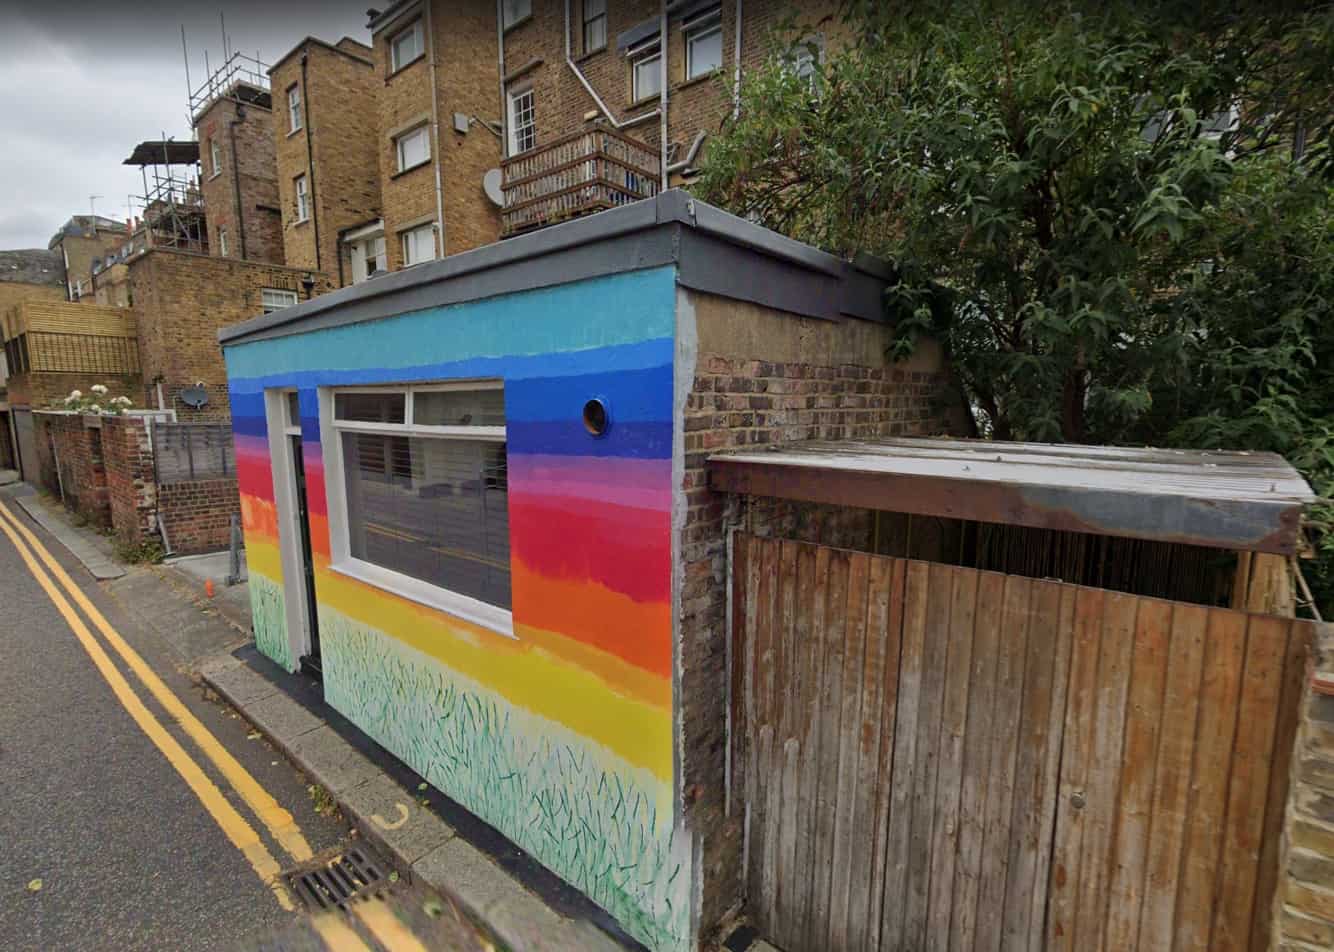 ‘London is a truly ridiculous place’: Converted 1 bed garage goes up for sale for £400k